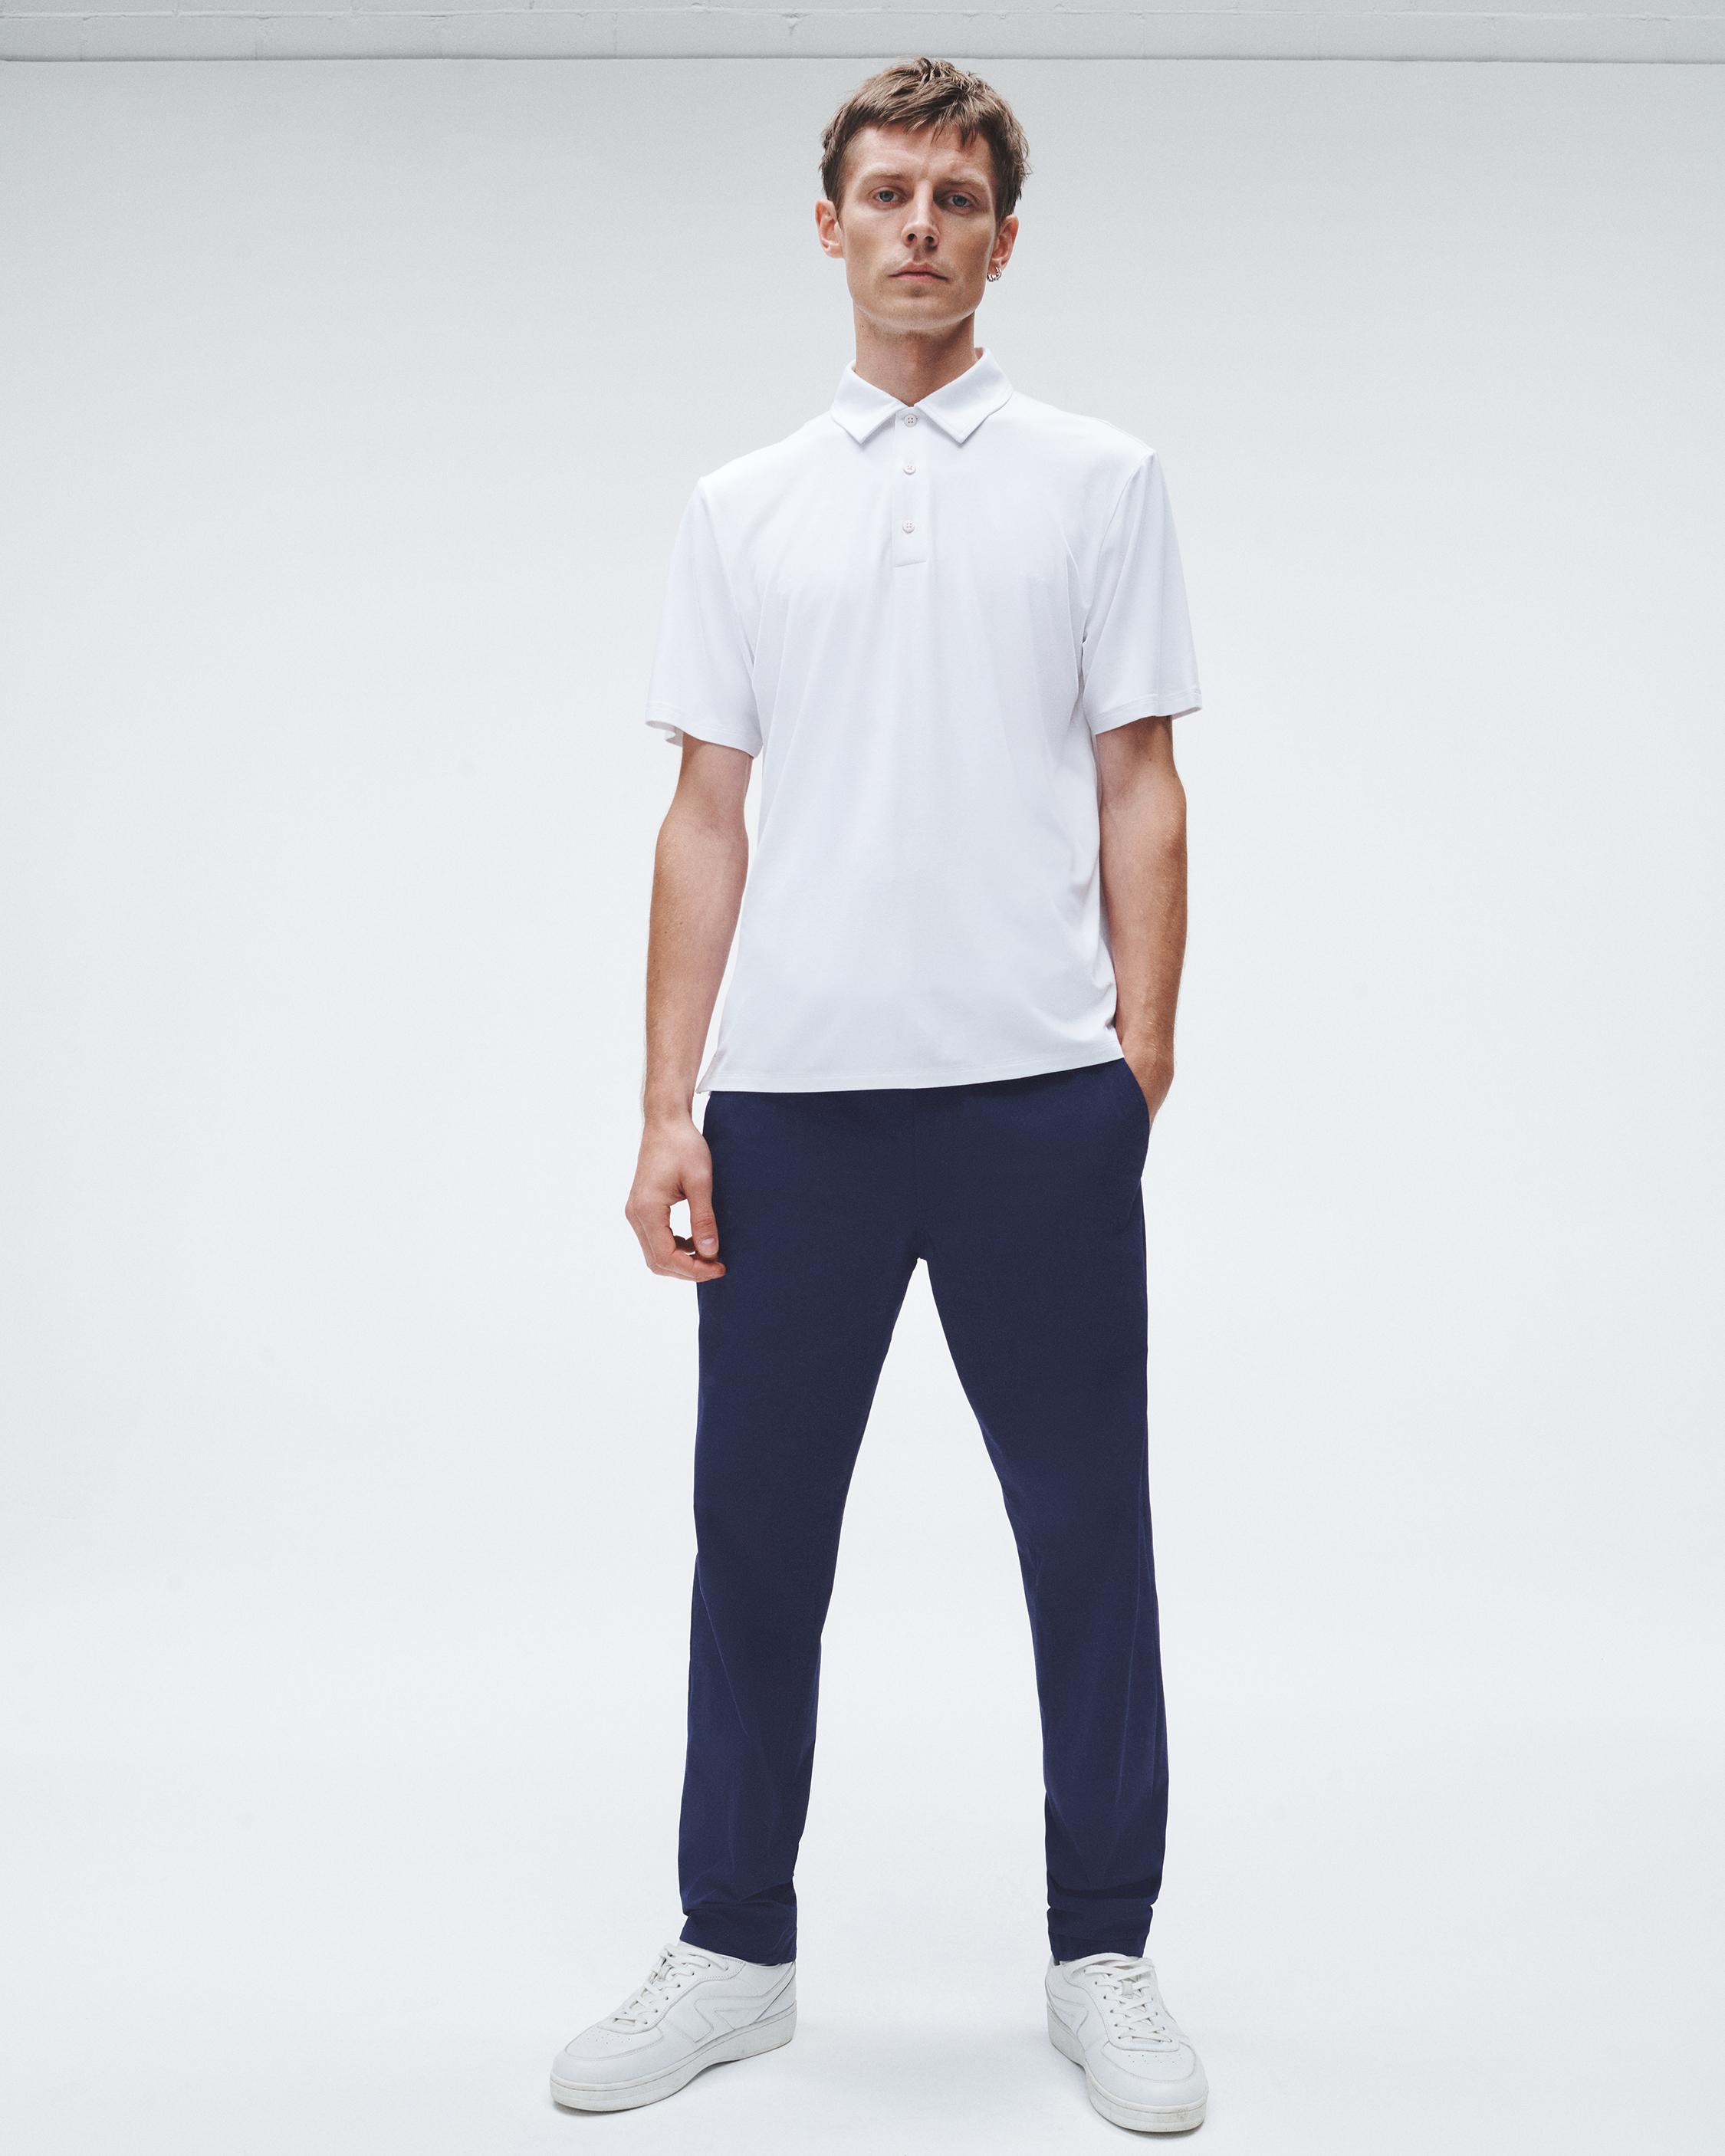 Men's Pants, Trousers, Chinos & More